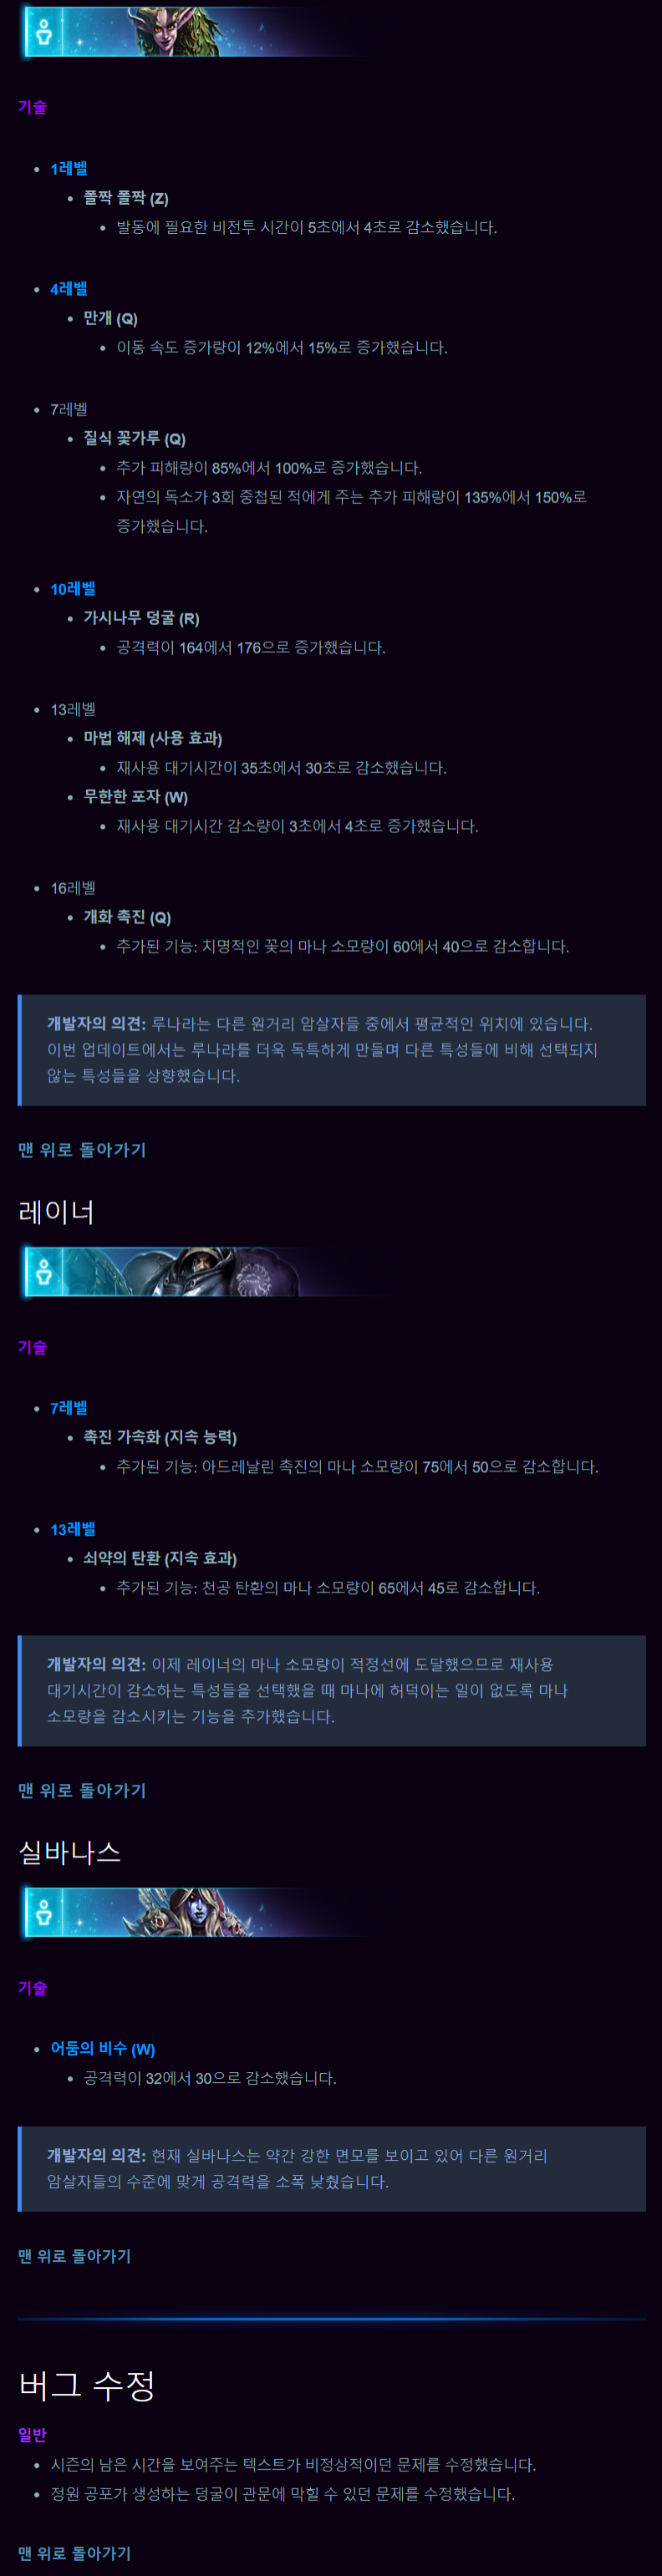 Patch_45.1_KR_2.png